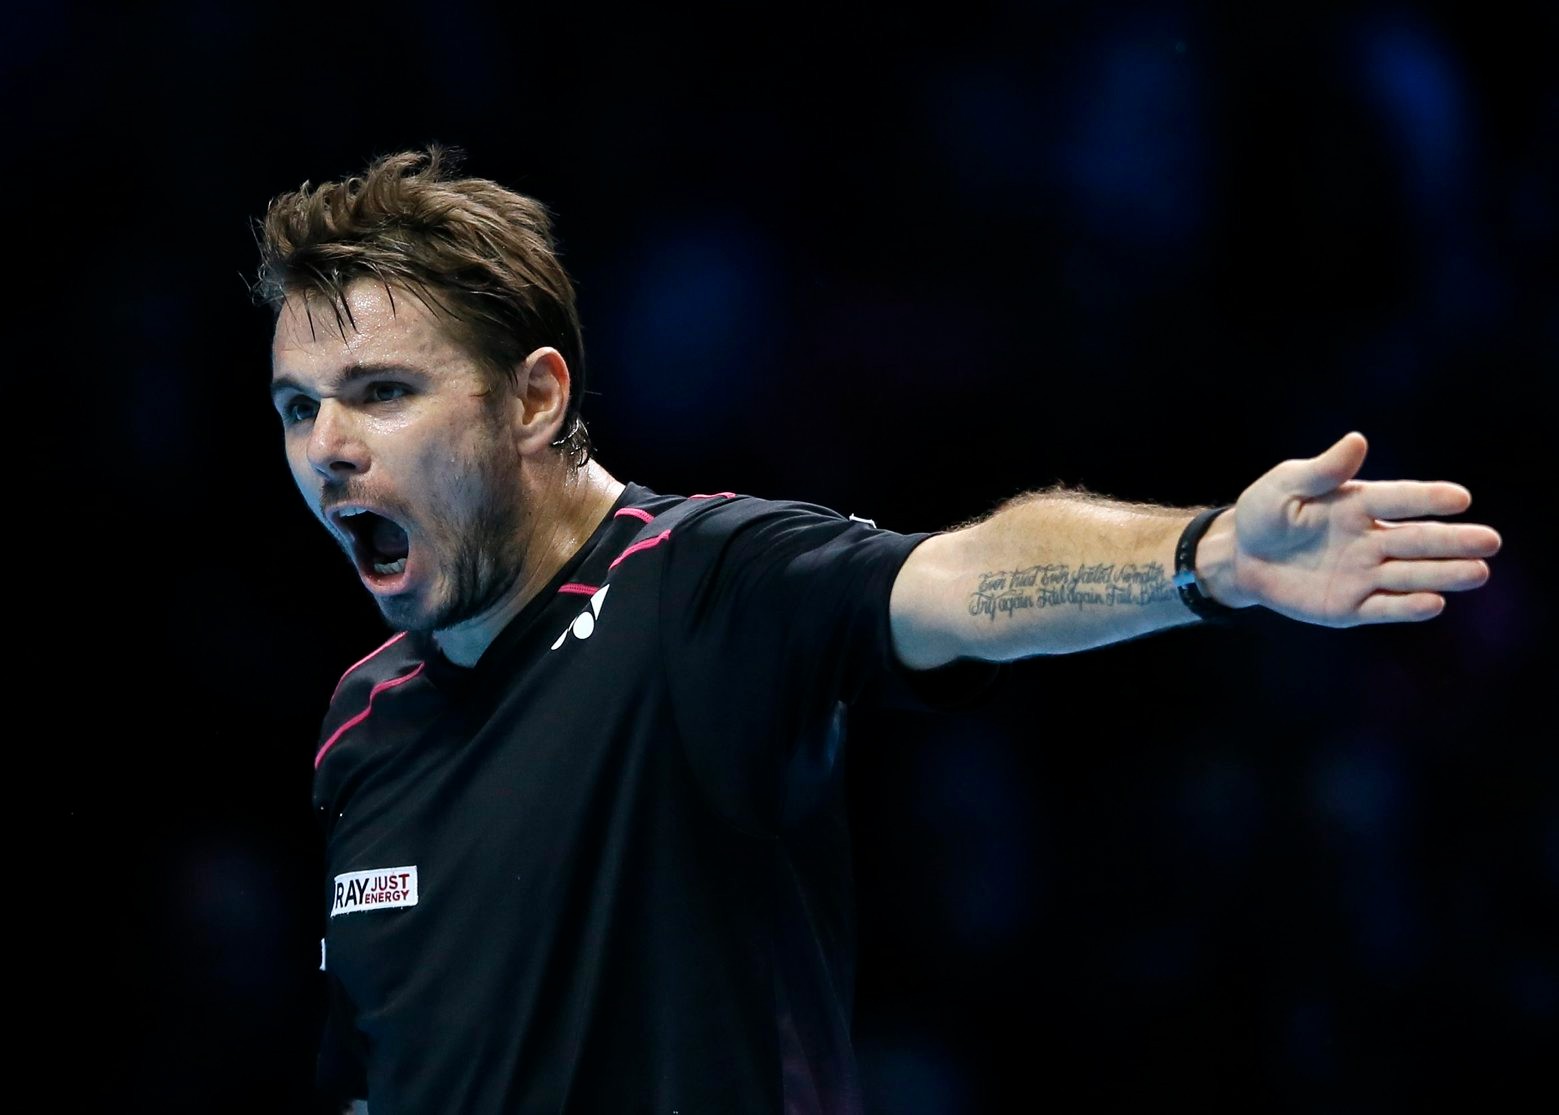 Stan Wawrinka of Switzerland shouts after he plays a return to David Ferrer of Spain during their singles tennis match at the ATP World Tour Finals at the O2 Arena in London, Wednesday, Nov. 18, 2015. (AP Photo/Kirsty Wigglesworth) Britain Tennis ATP Finals